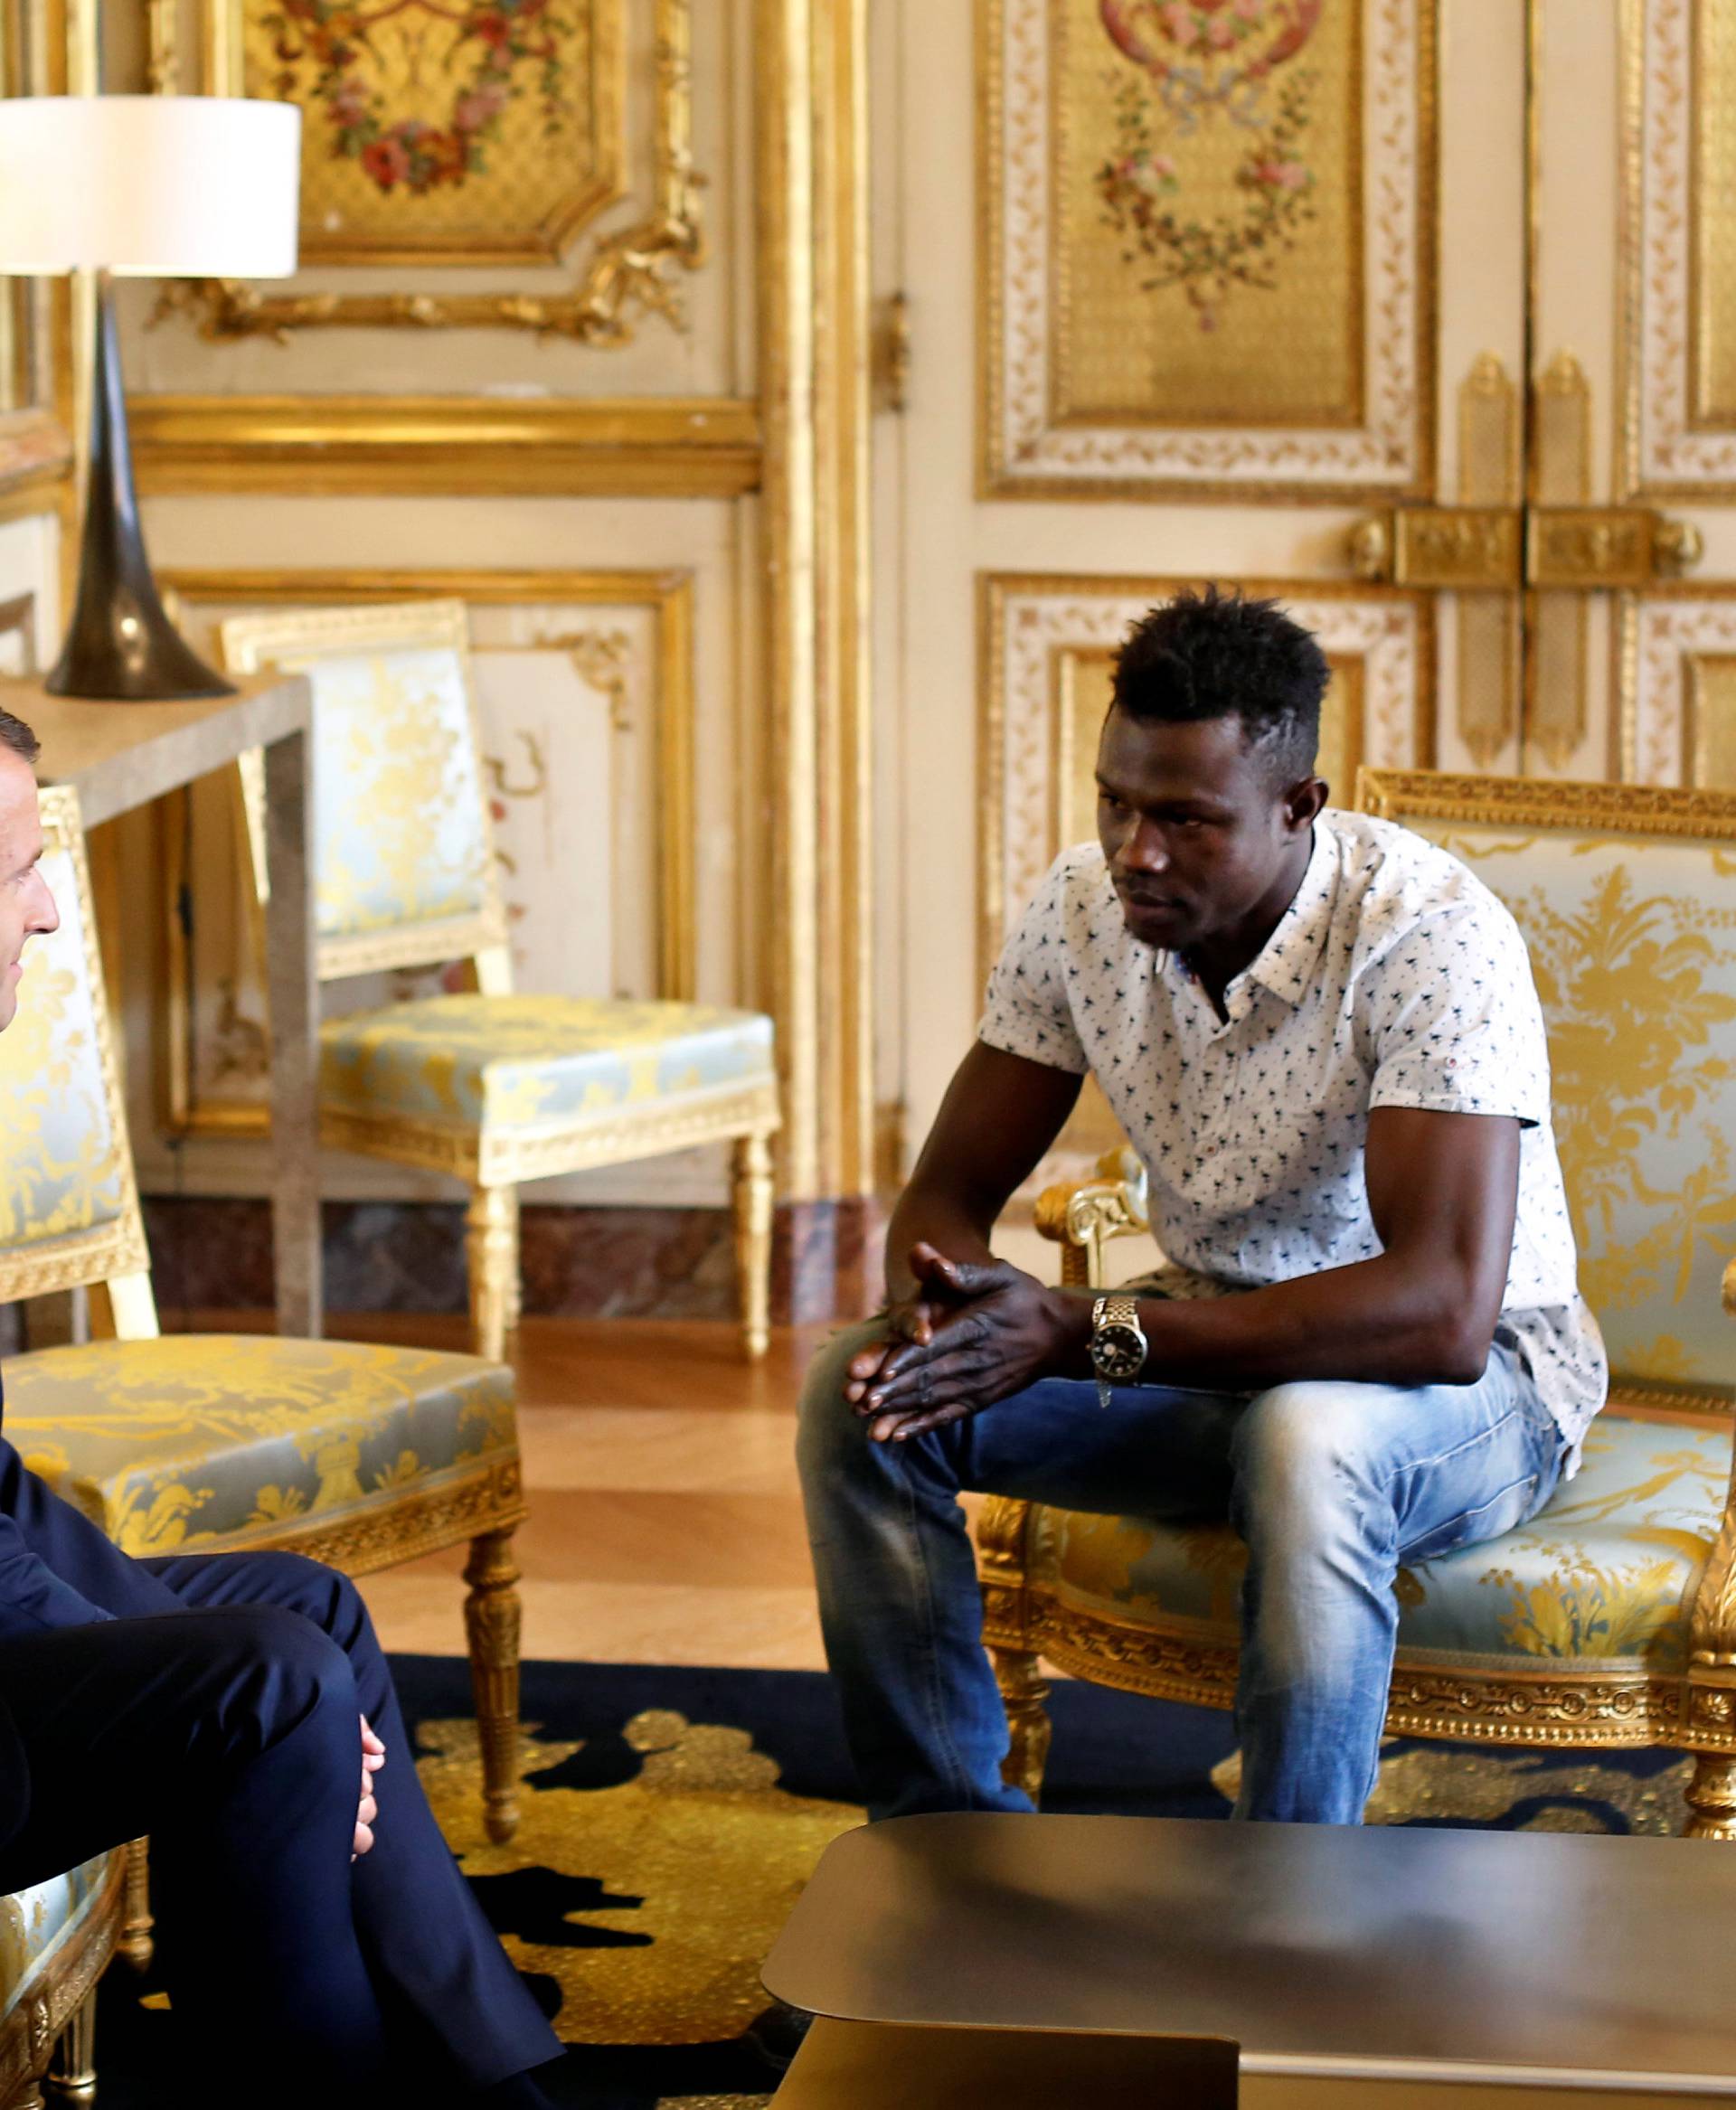 French President Emmanuel Macron meets with Mamoudou Gassama, 22, from Mali, at the Elysee Palace in Paris